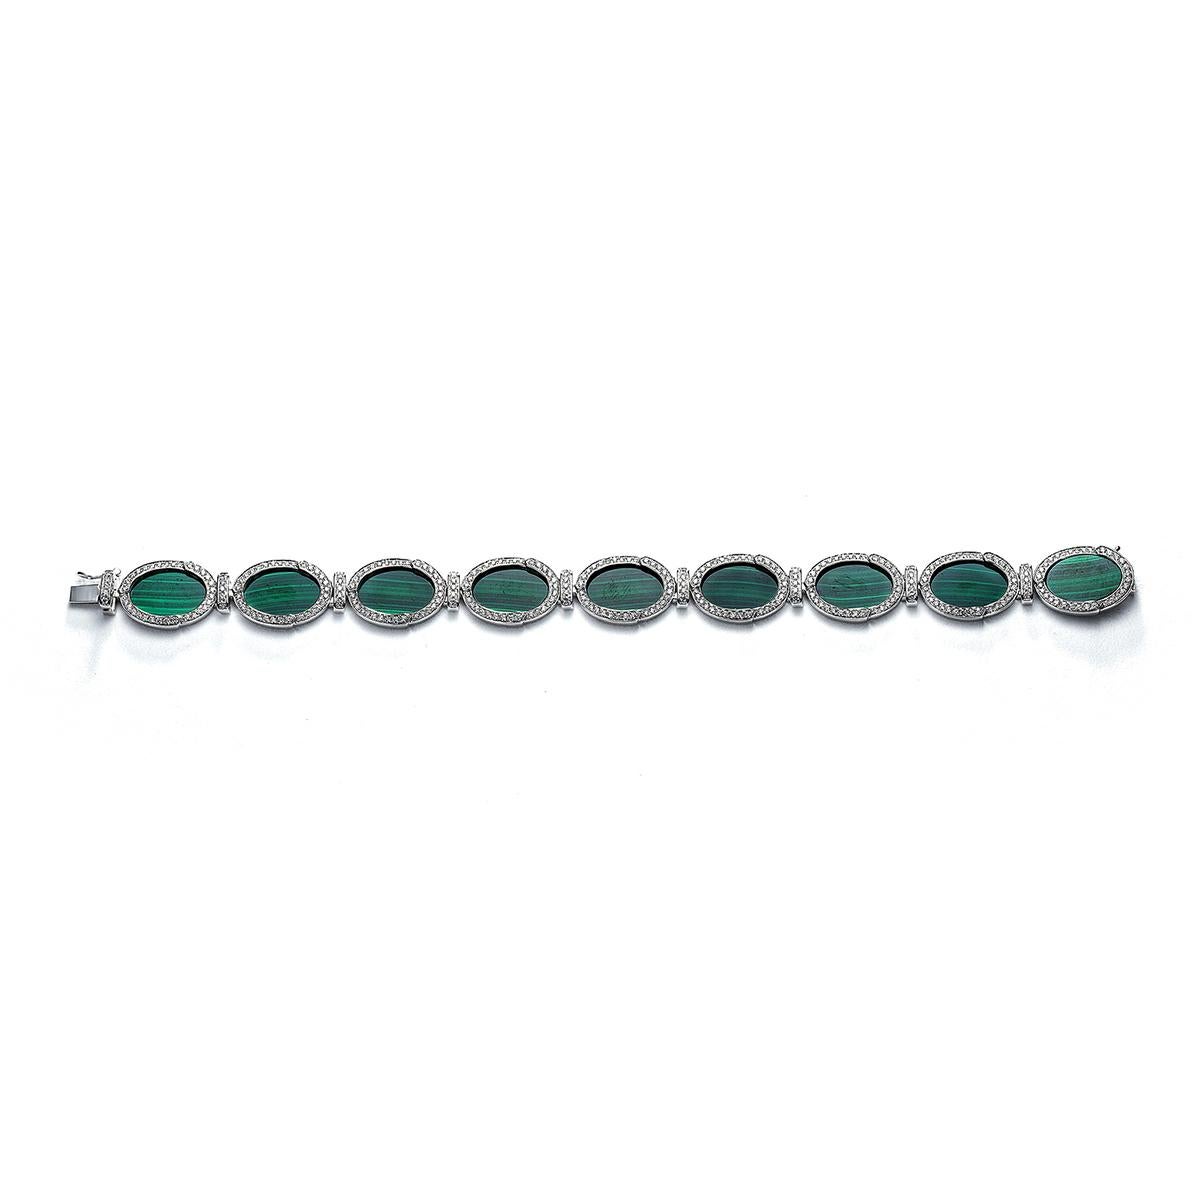 Bracelet in 18kt white gold set with 333 diamonds 1.87 cts and 9 malachites 23.04 cts   